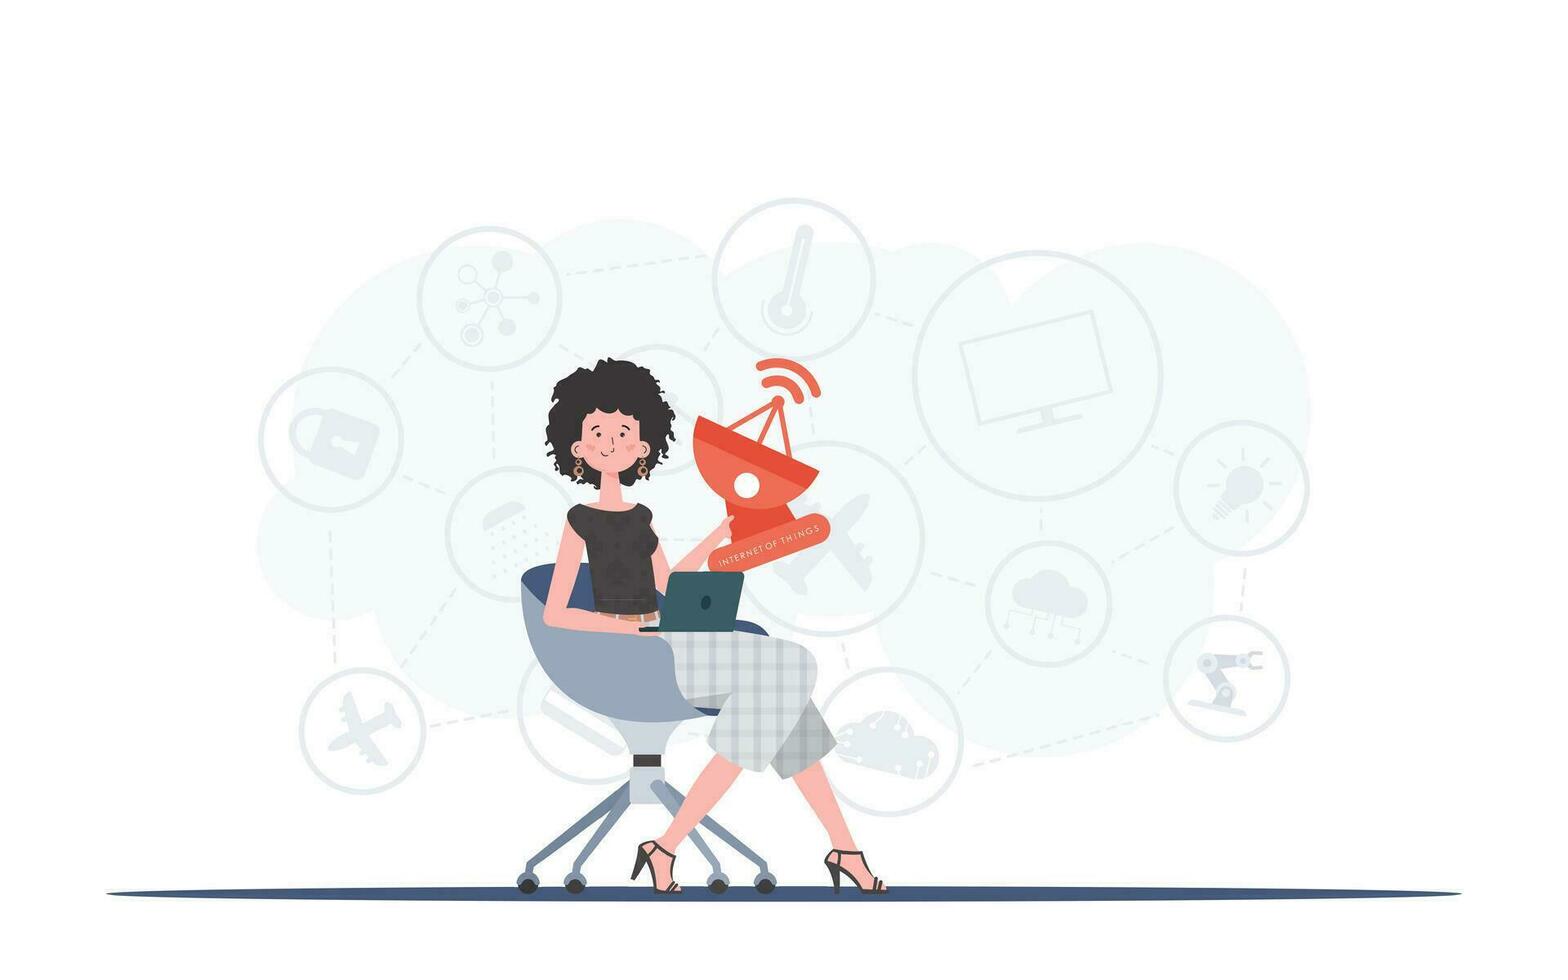 A woman holds a satellite dish in her hands. Internet of things and automation concept. Good for presentations, websites and typography. Vector illustration in flat style.